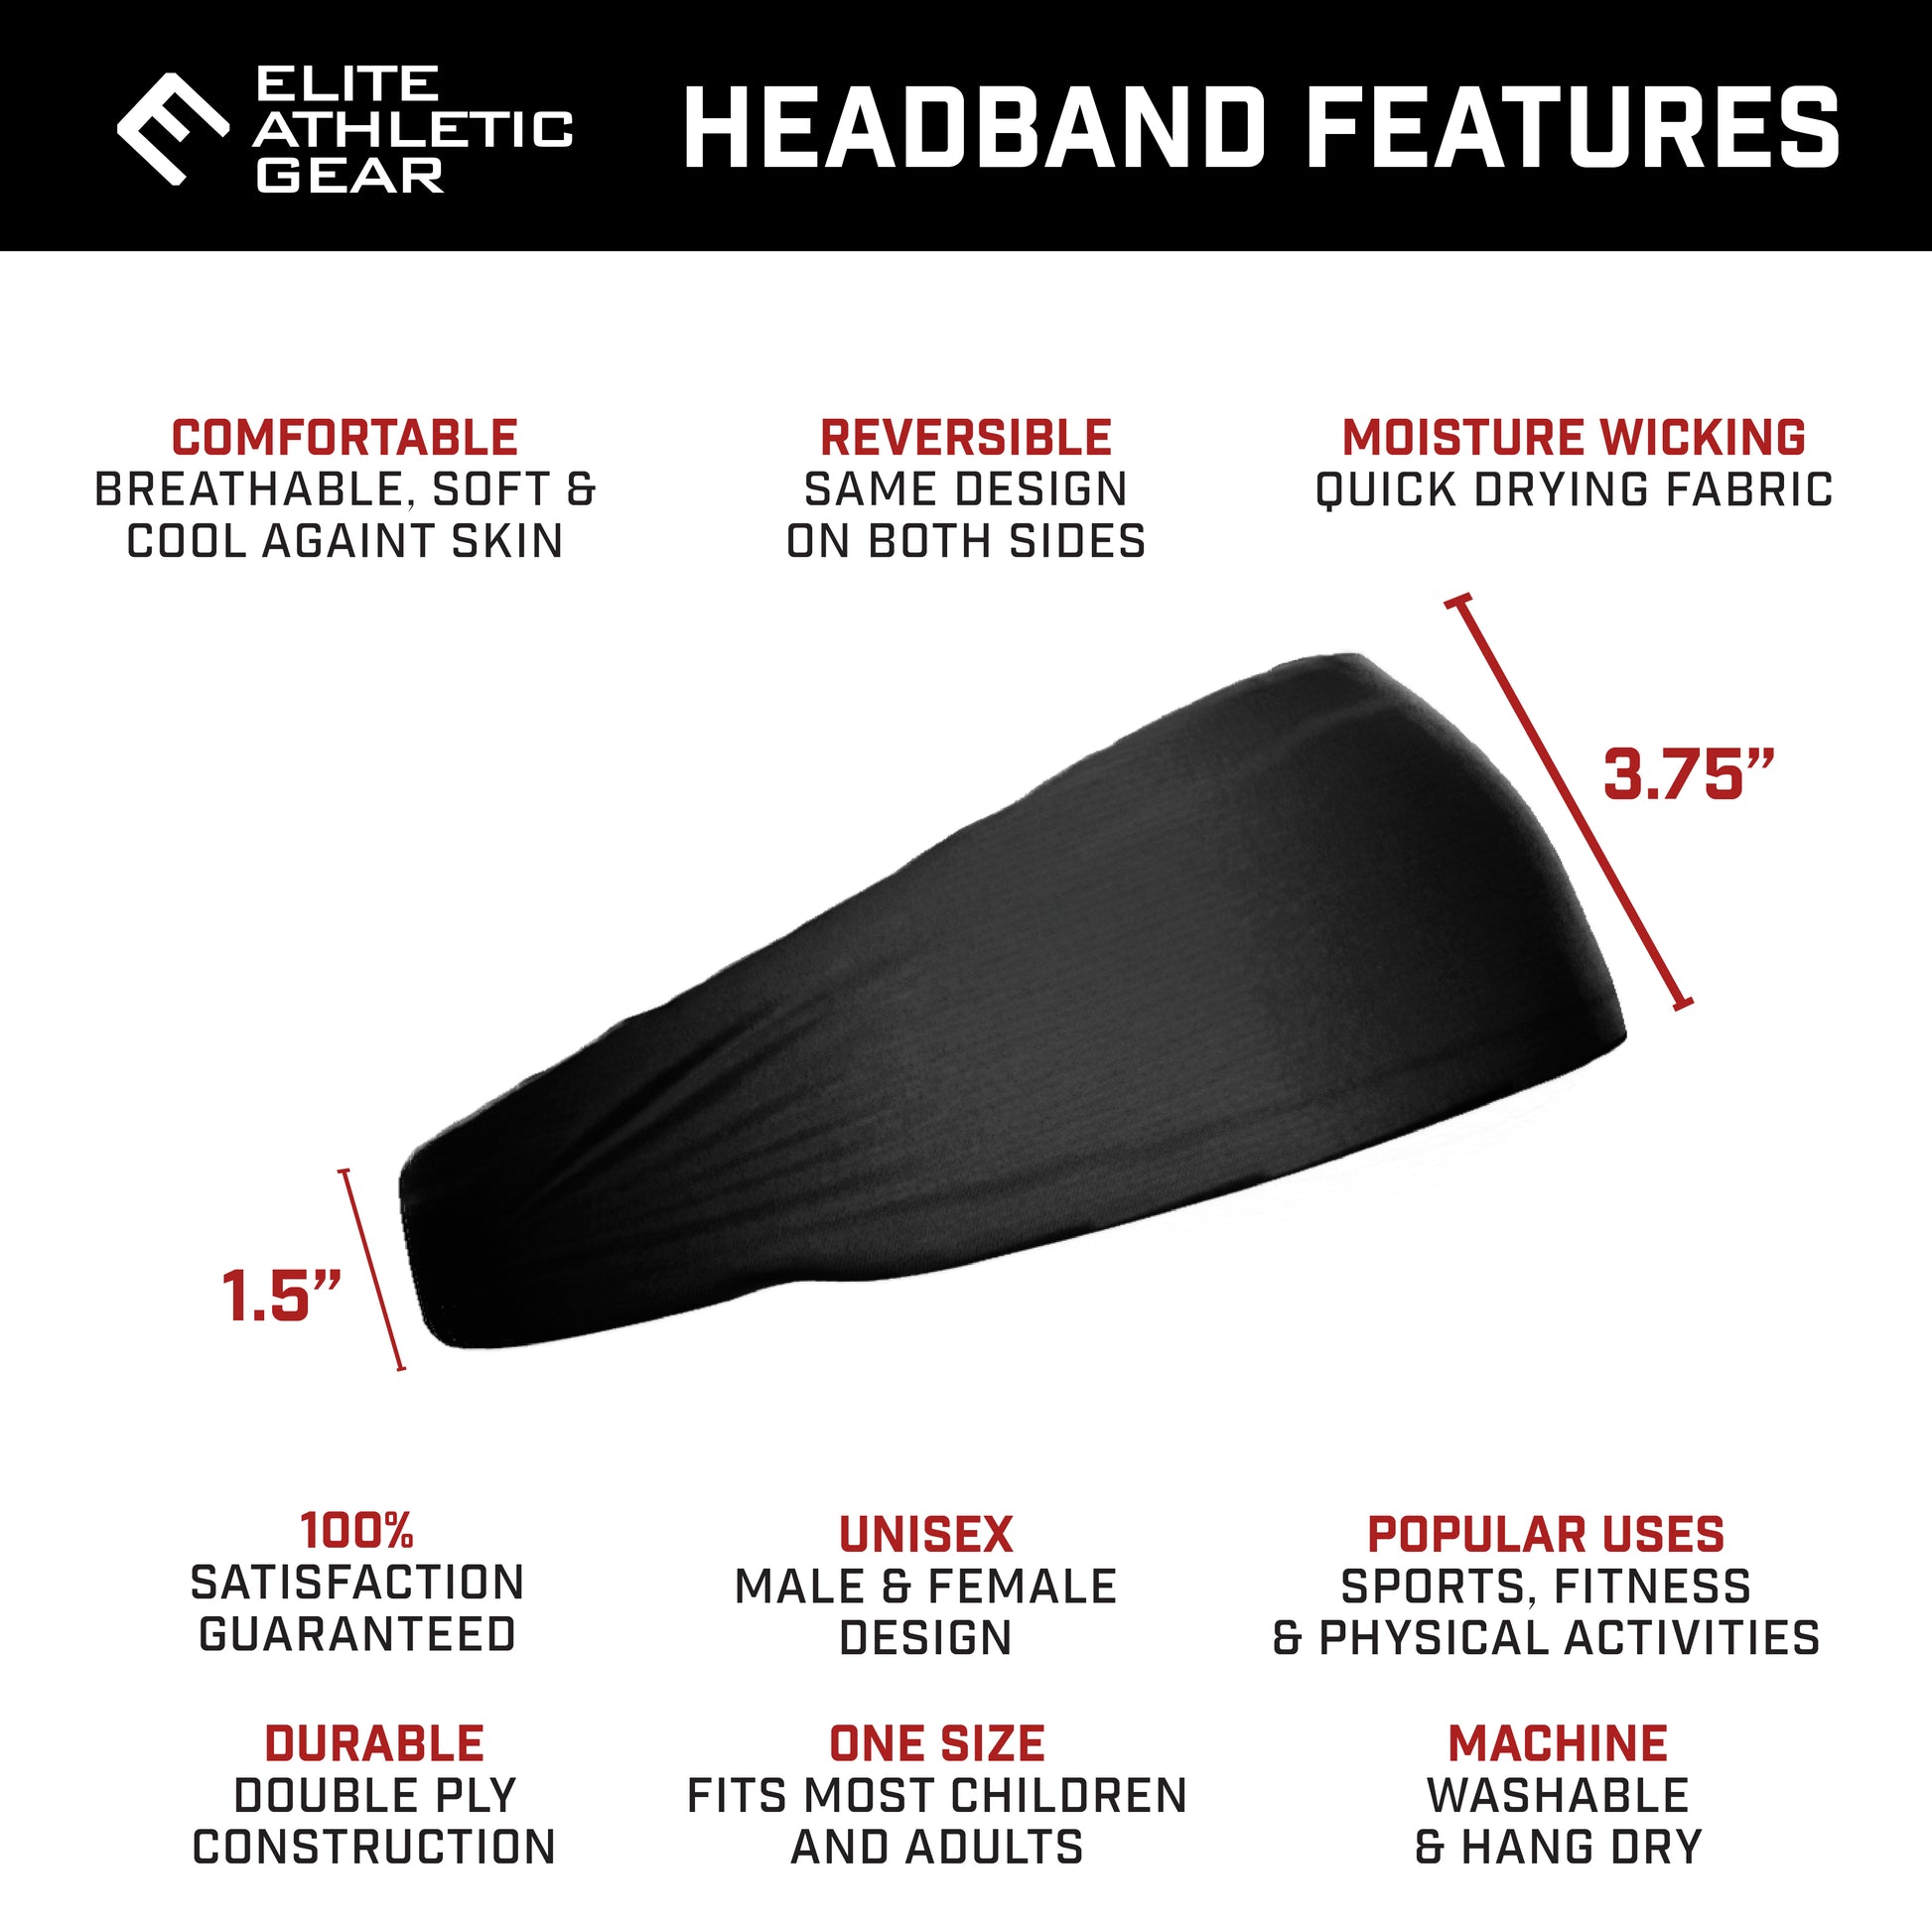 Leader of the Pack Headband